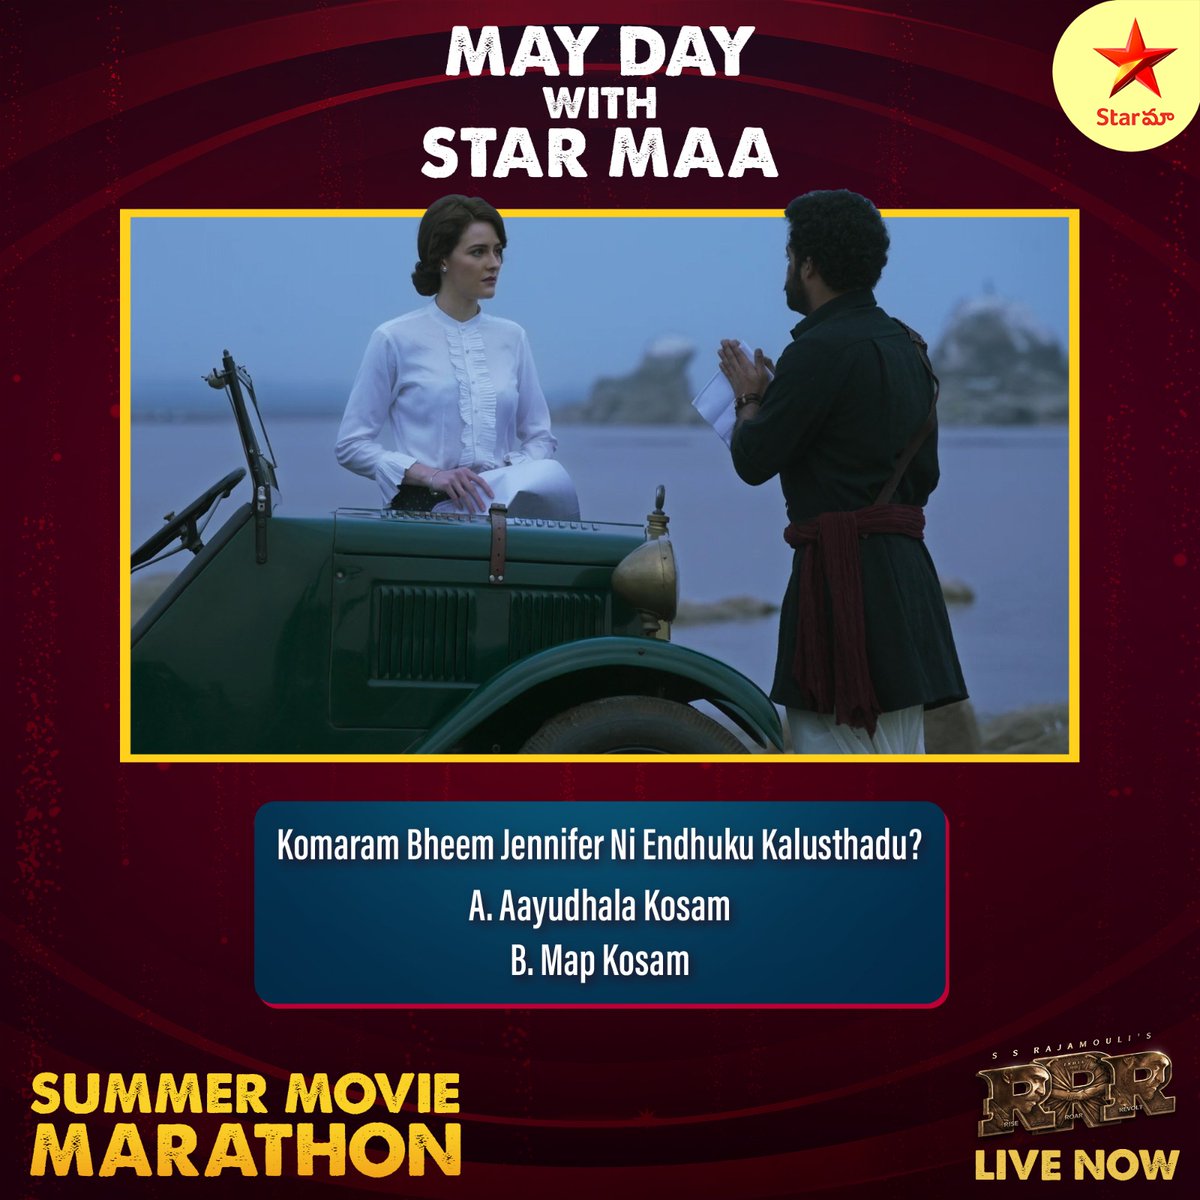 Why Komaram Bheem met Jennifer? was it for weapons or any Map ?? Share your answers in the comments below! 🔍 Don't miss out on this exciting quiz challenge! Watch #MayDaySpecial on #StarMaa featuring a lineup of blockbuster hits including #RRR and more thrilling movies.